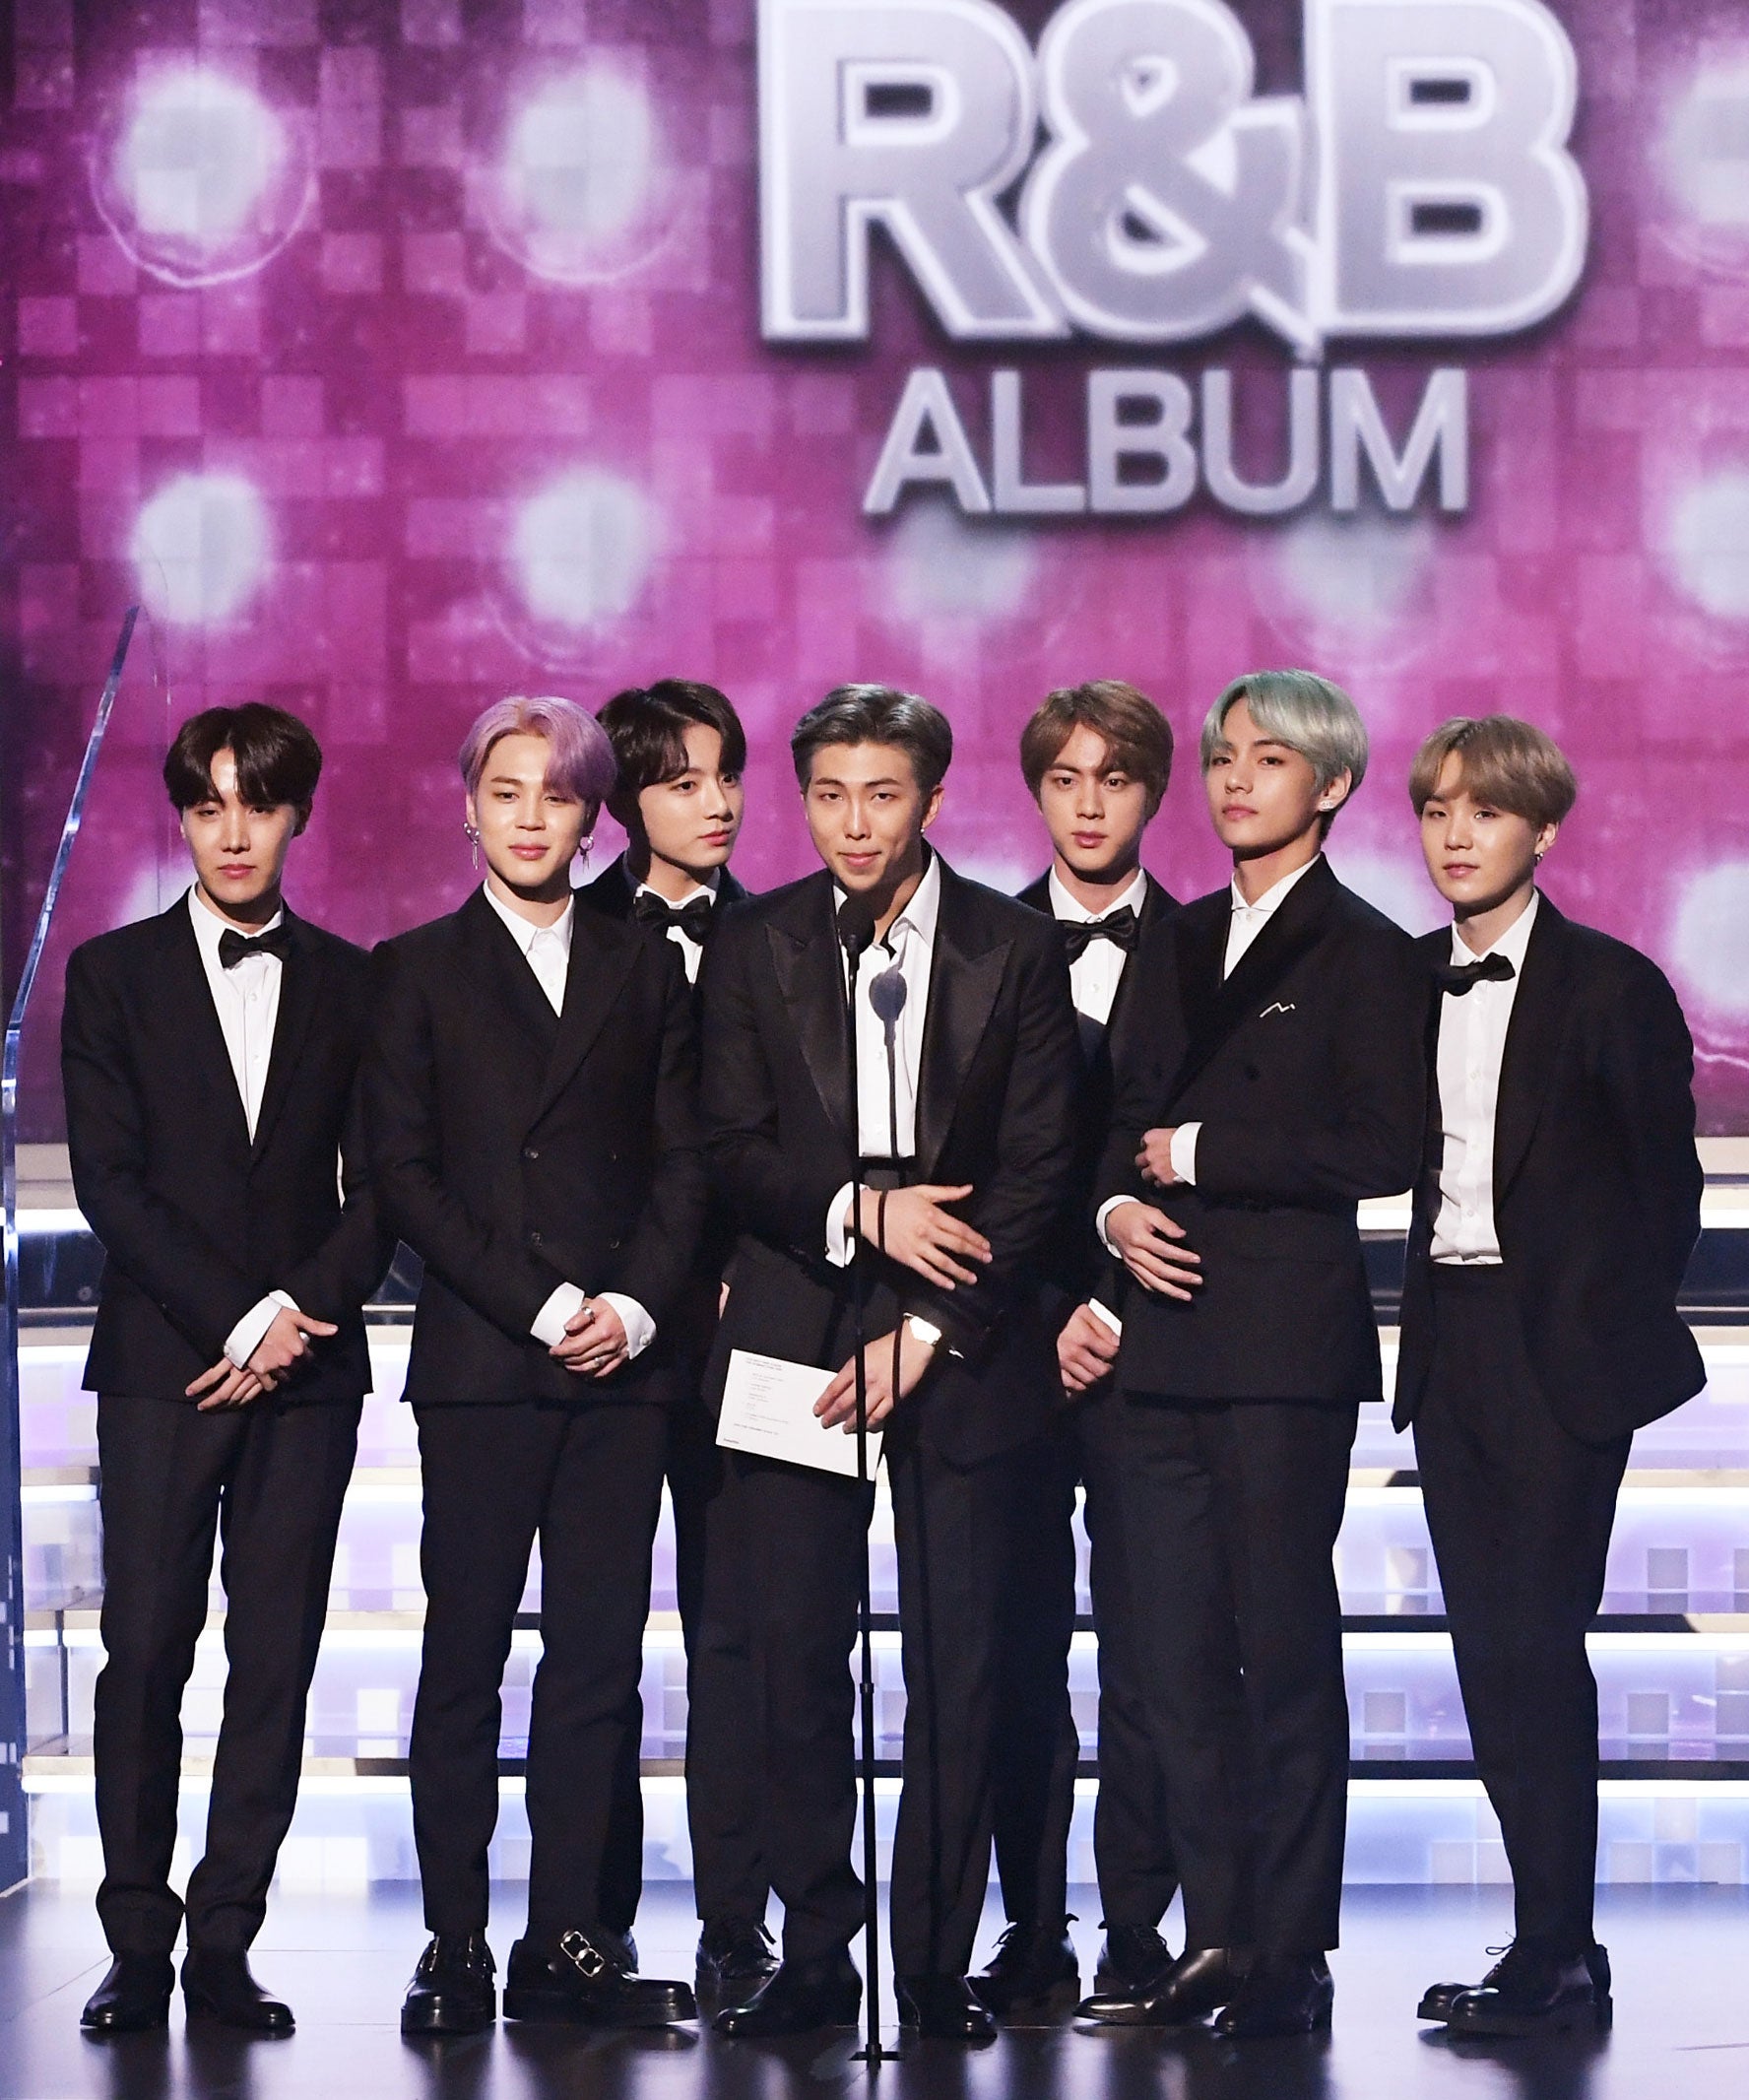 BTS To Perform At The 2021 GRAMMY Awards Show, Confirmed By The